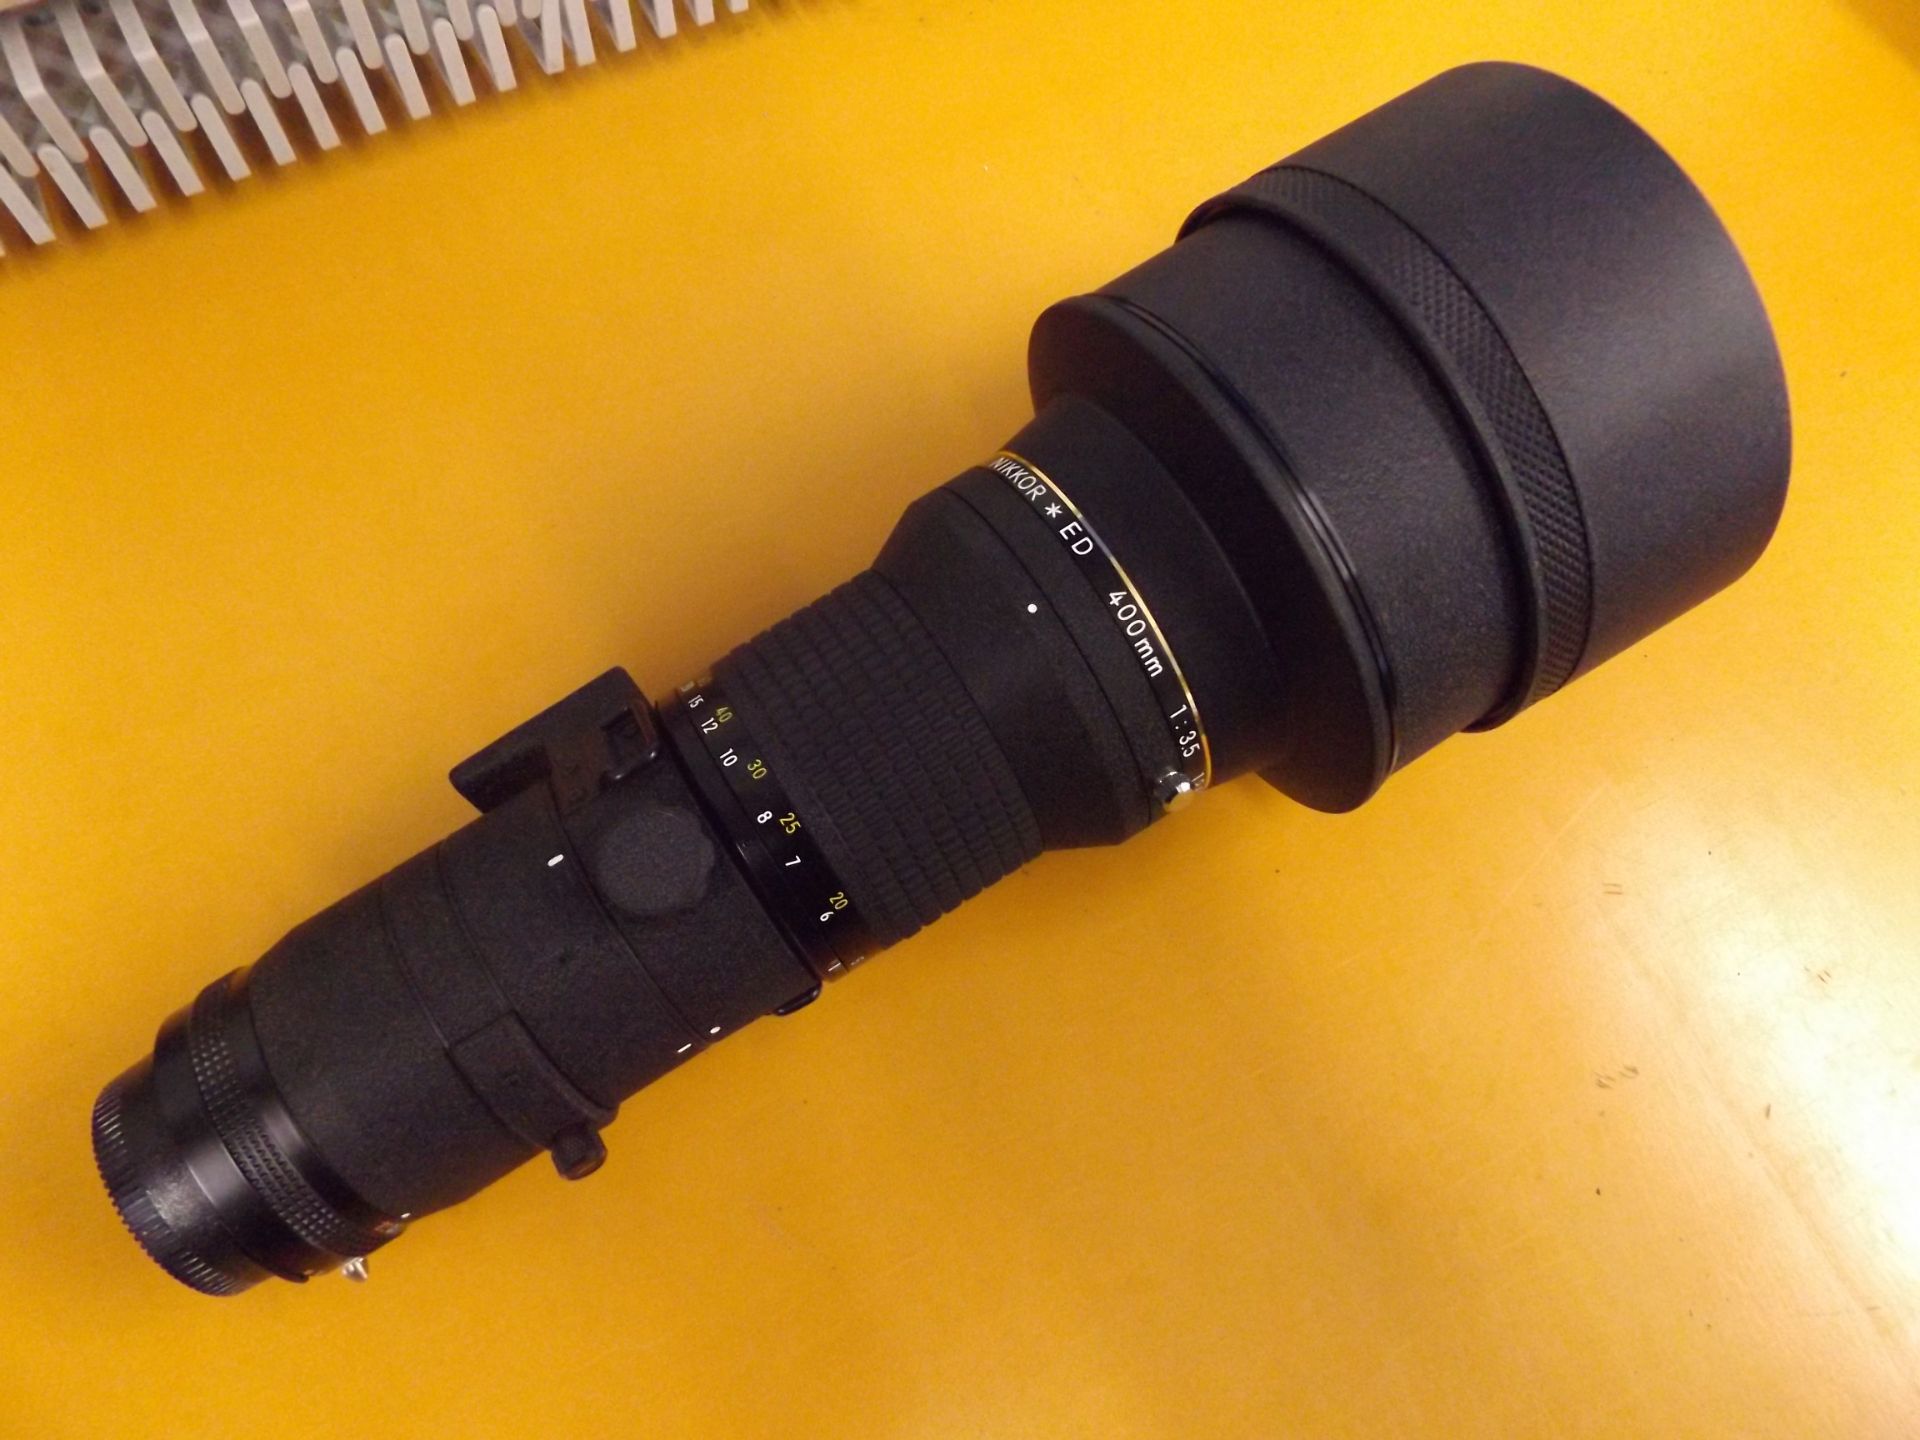 Nikon Nikkor ED 400mm f/3.5 IF Lense with Leather Case